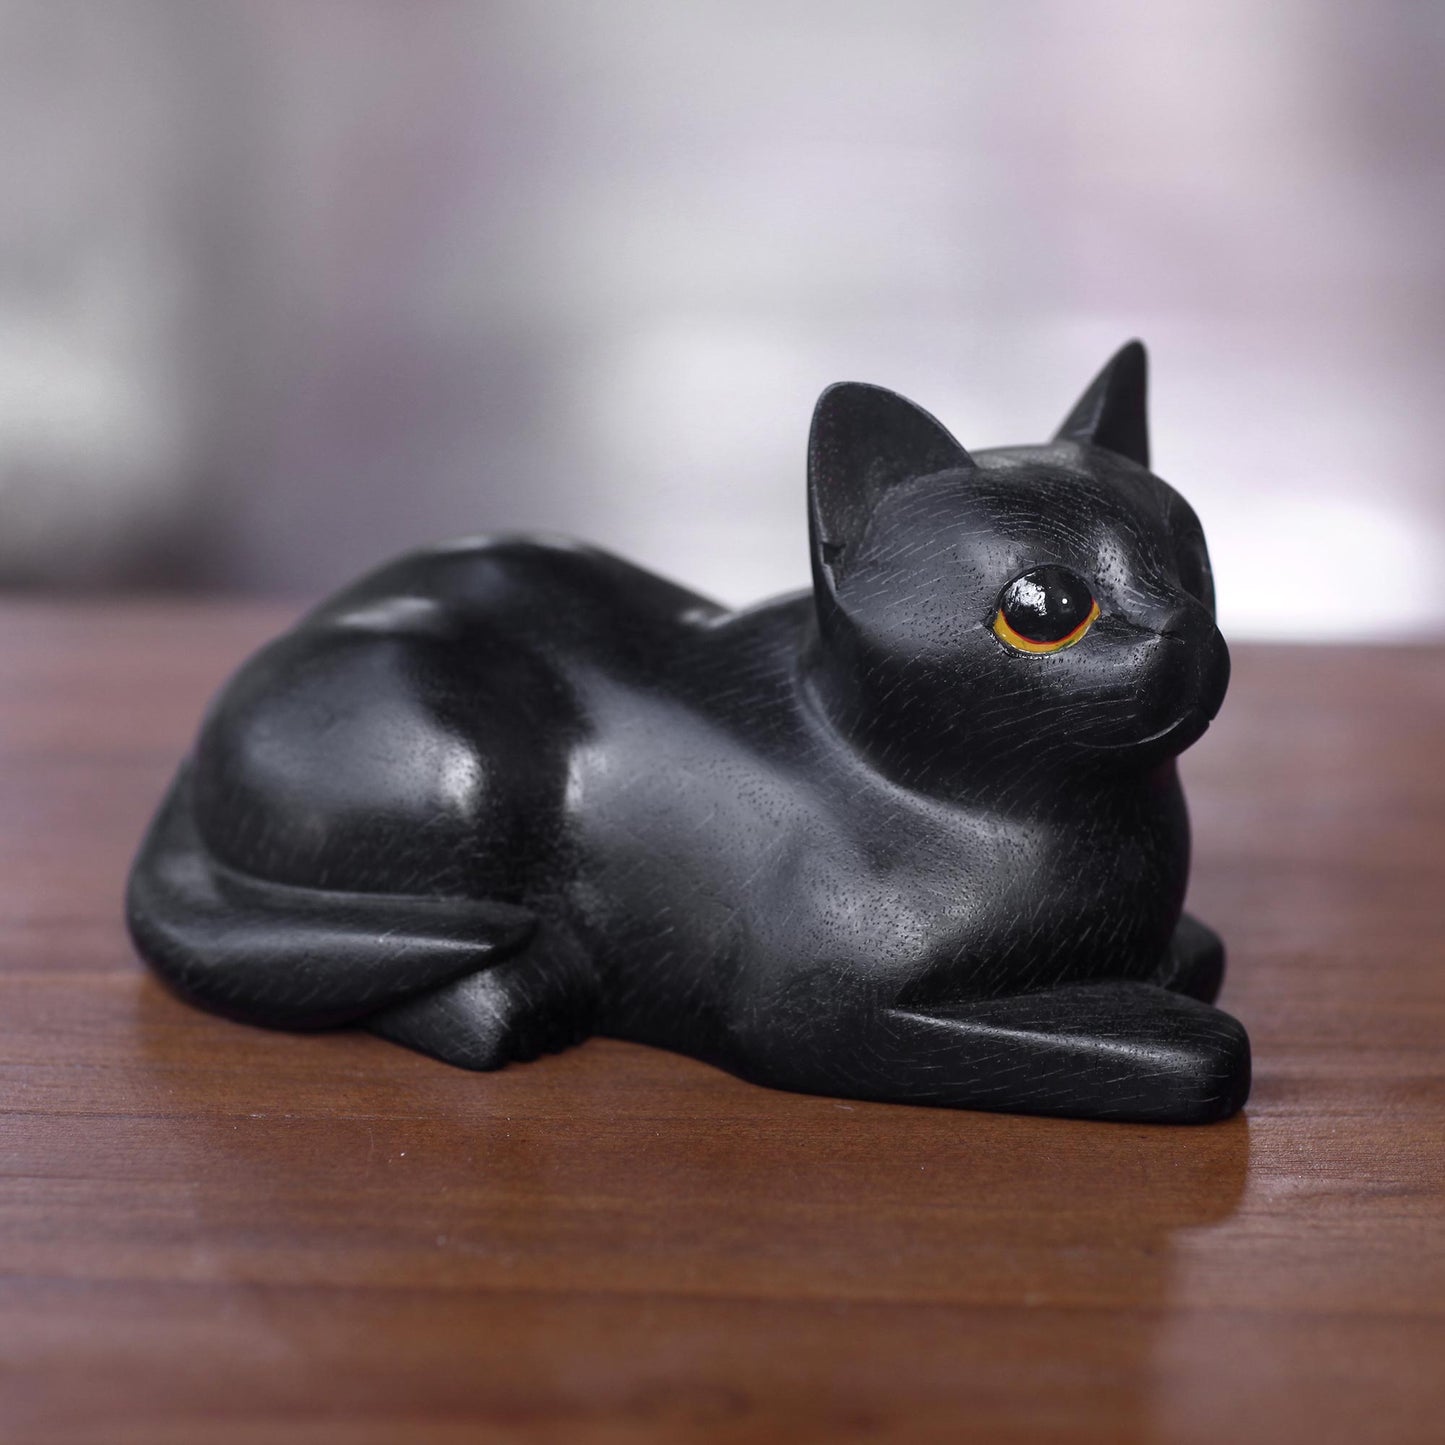 Stay Calm Black Cat Artisan Crafted Black Cat Sculpture from Indonesia